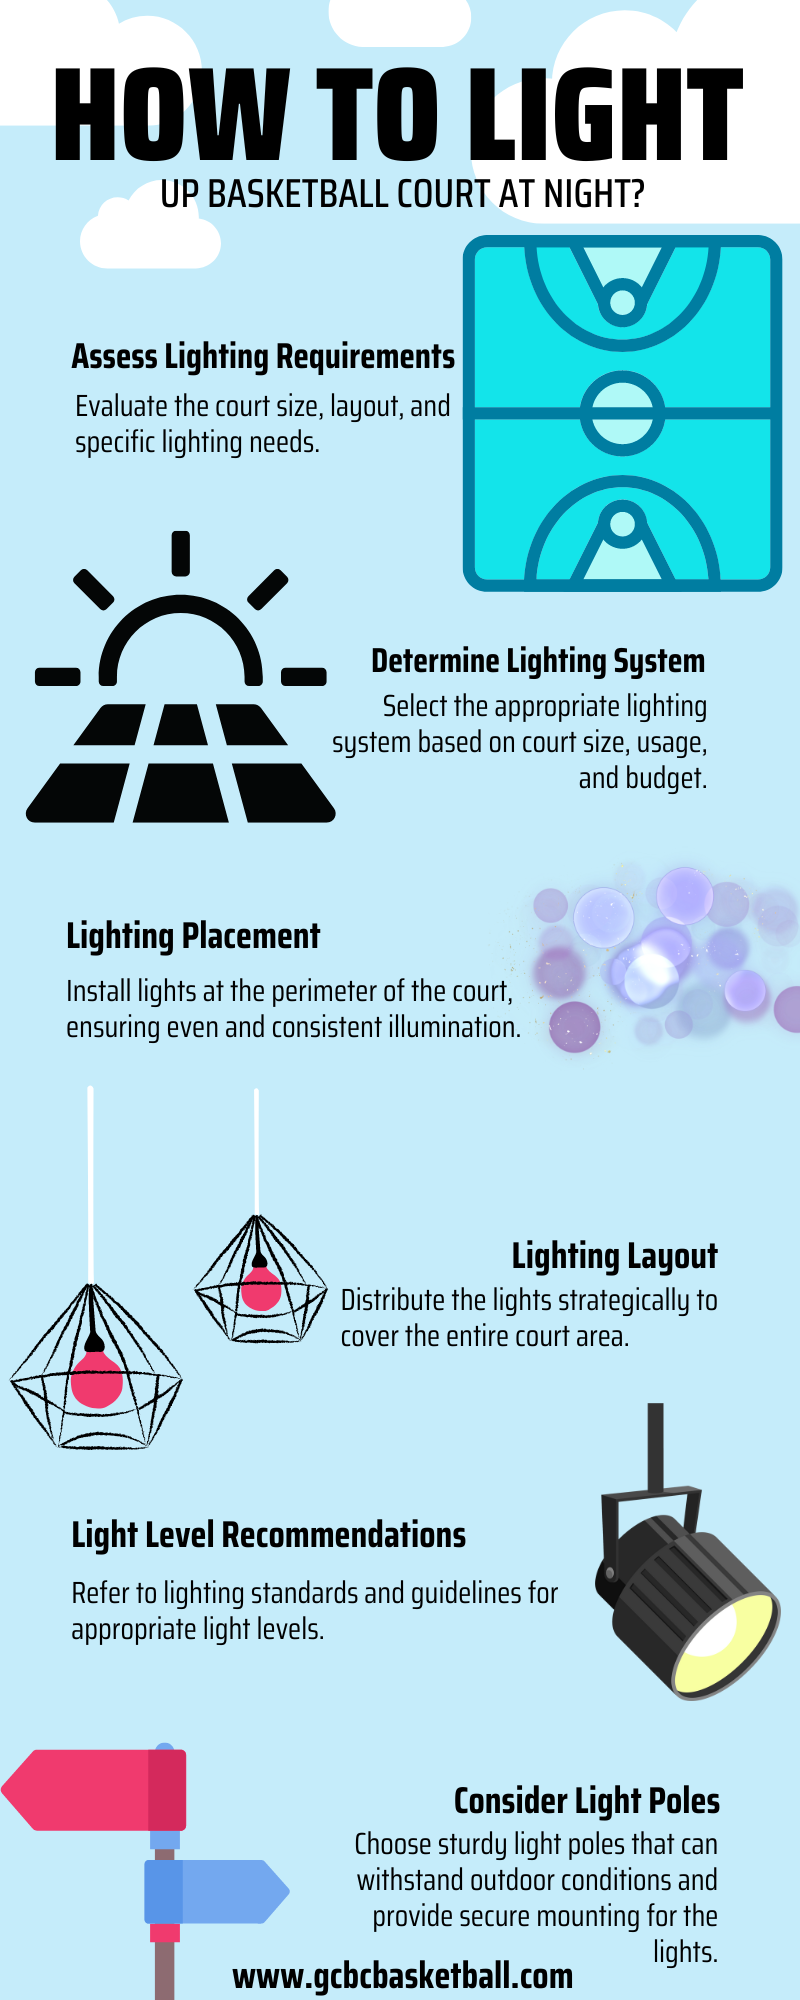 How to Light Up a Basketball Court at Night-Infographic